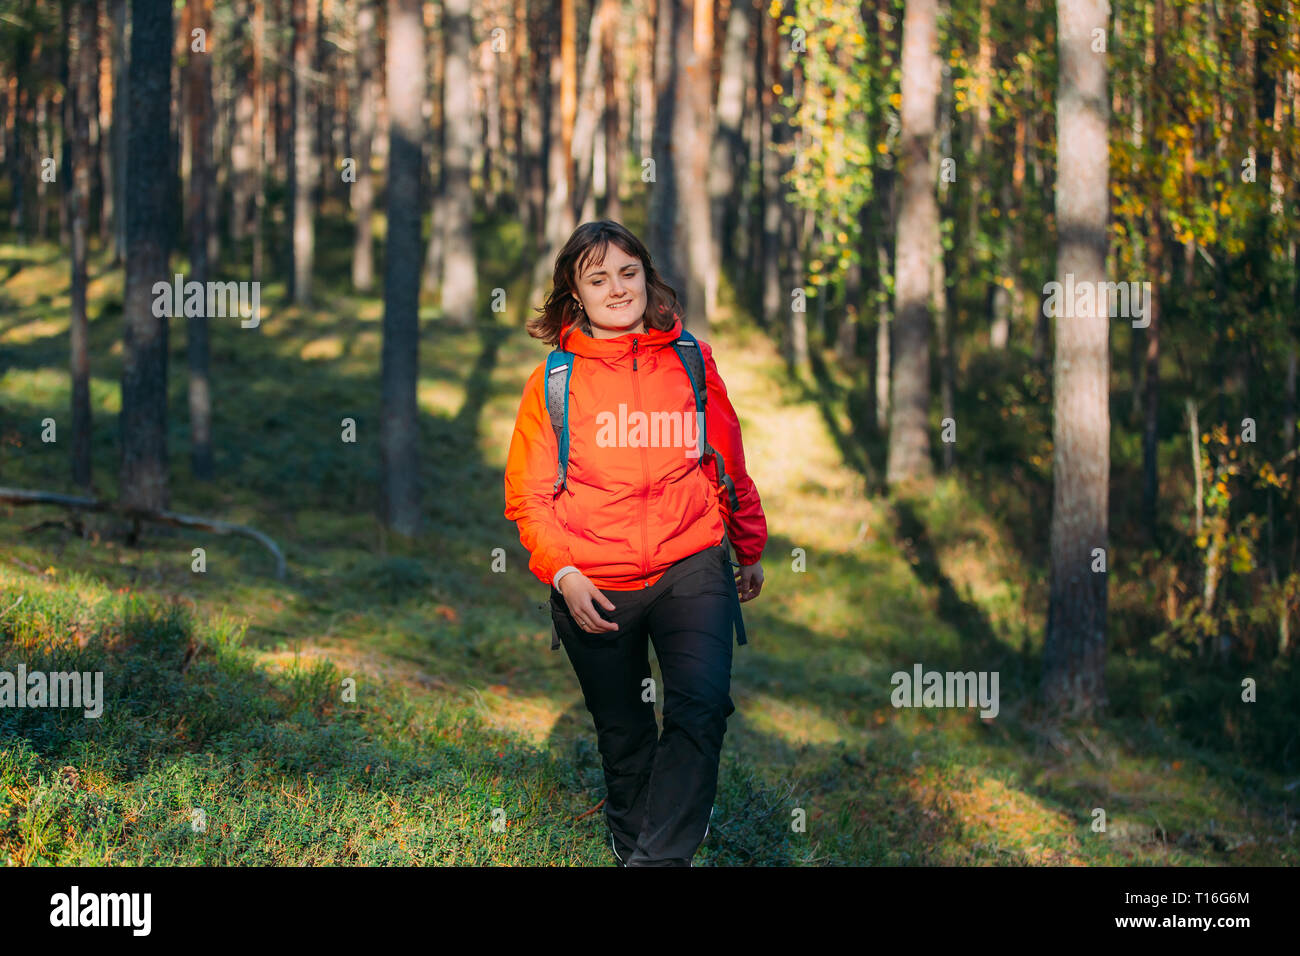 Active Young Beautiful CaucasianLady  Woman Dressed In Red Jacket Walking In Autumn Forest. Active Lifestyle In Fall Age Nature Stock Photo